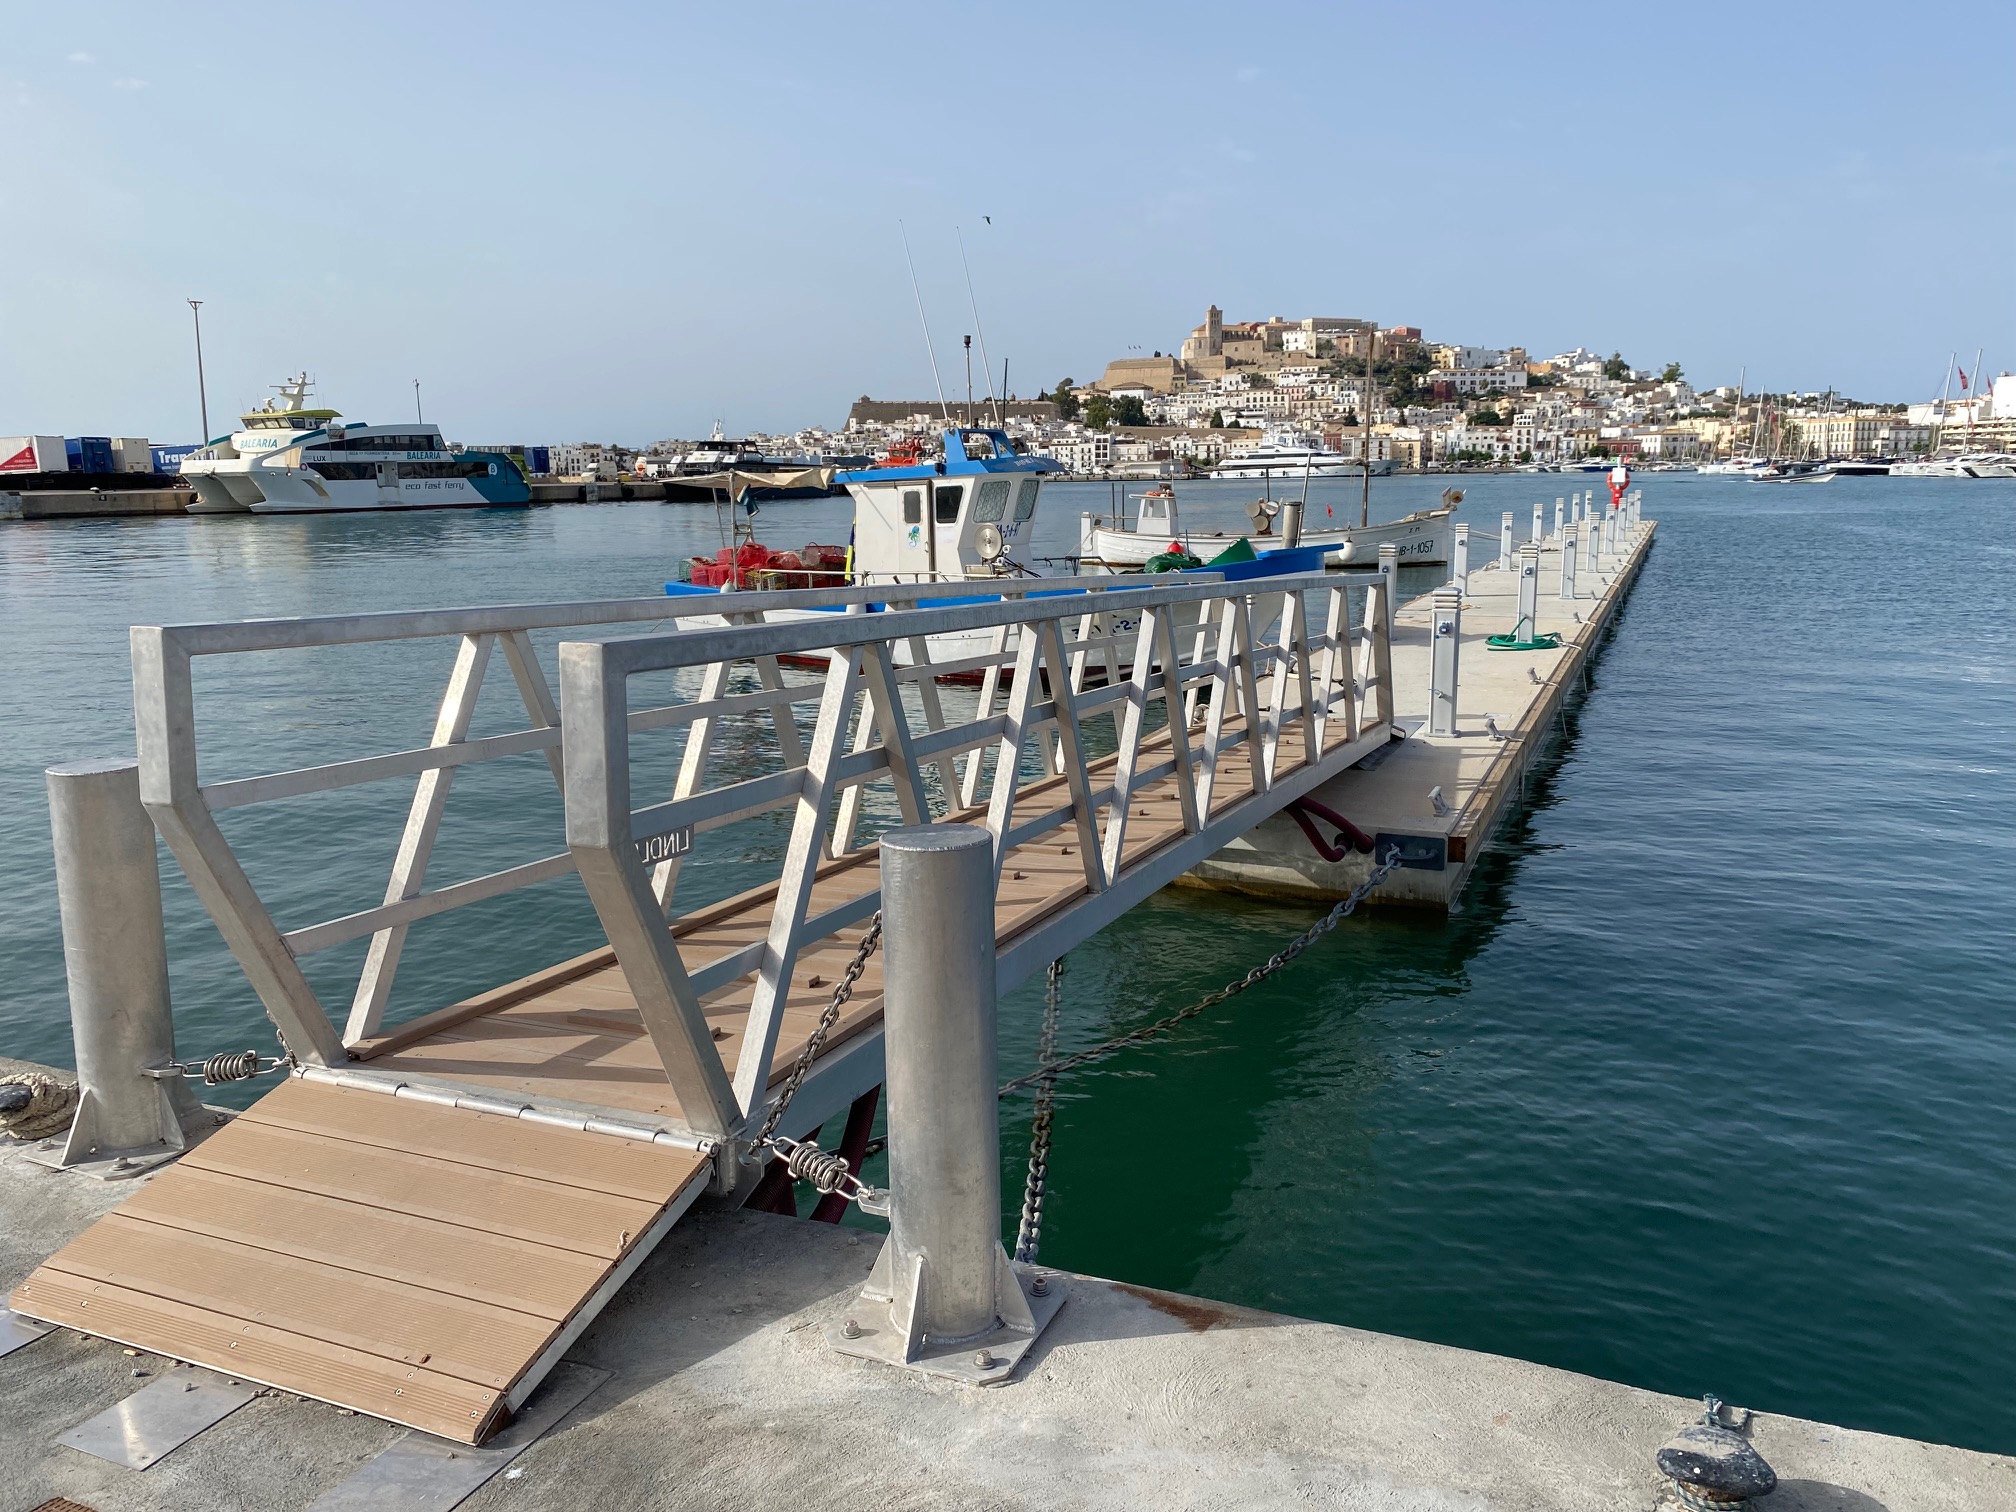 The APB replaces the floating pier of the fishing quay in the port of Ibiza